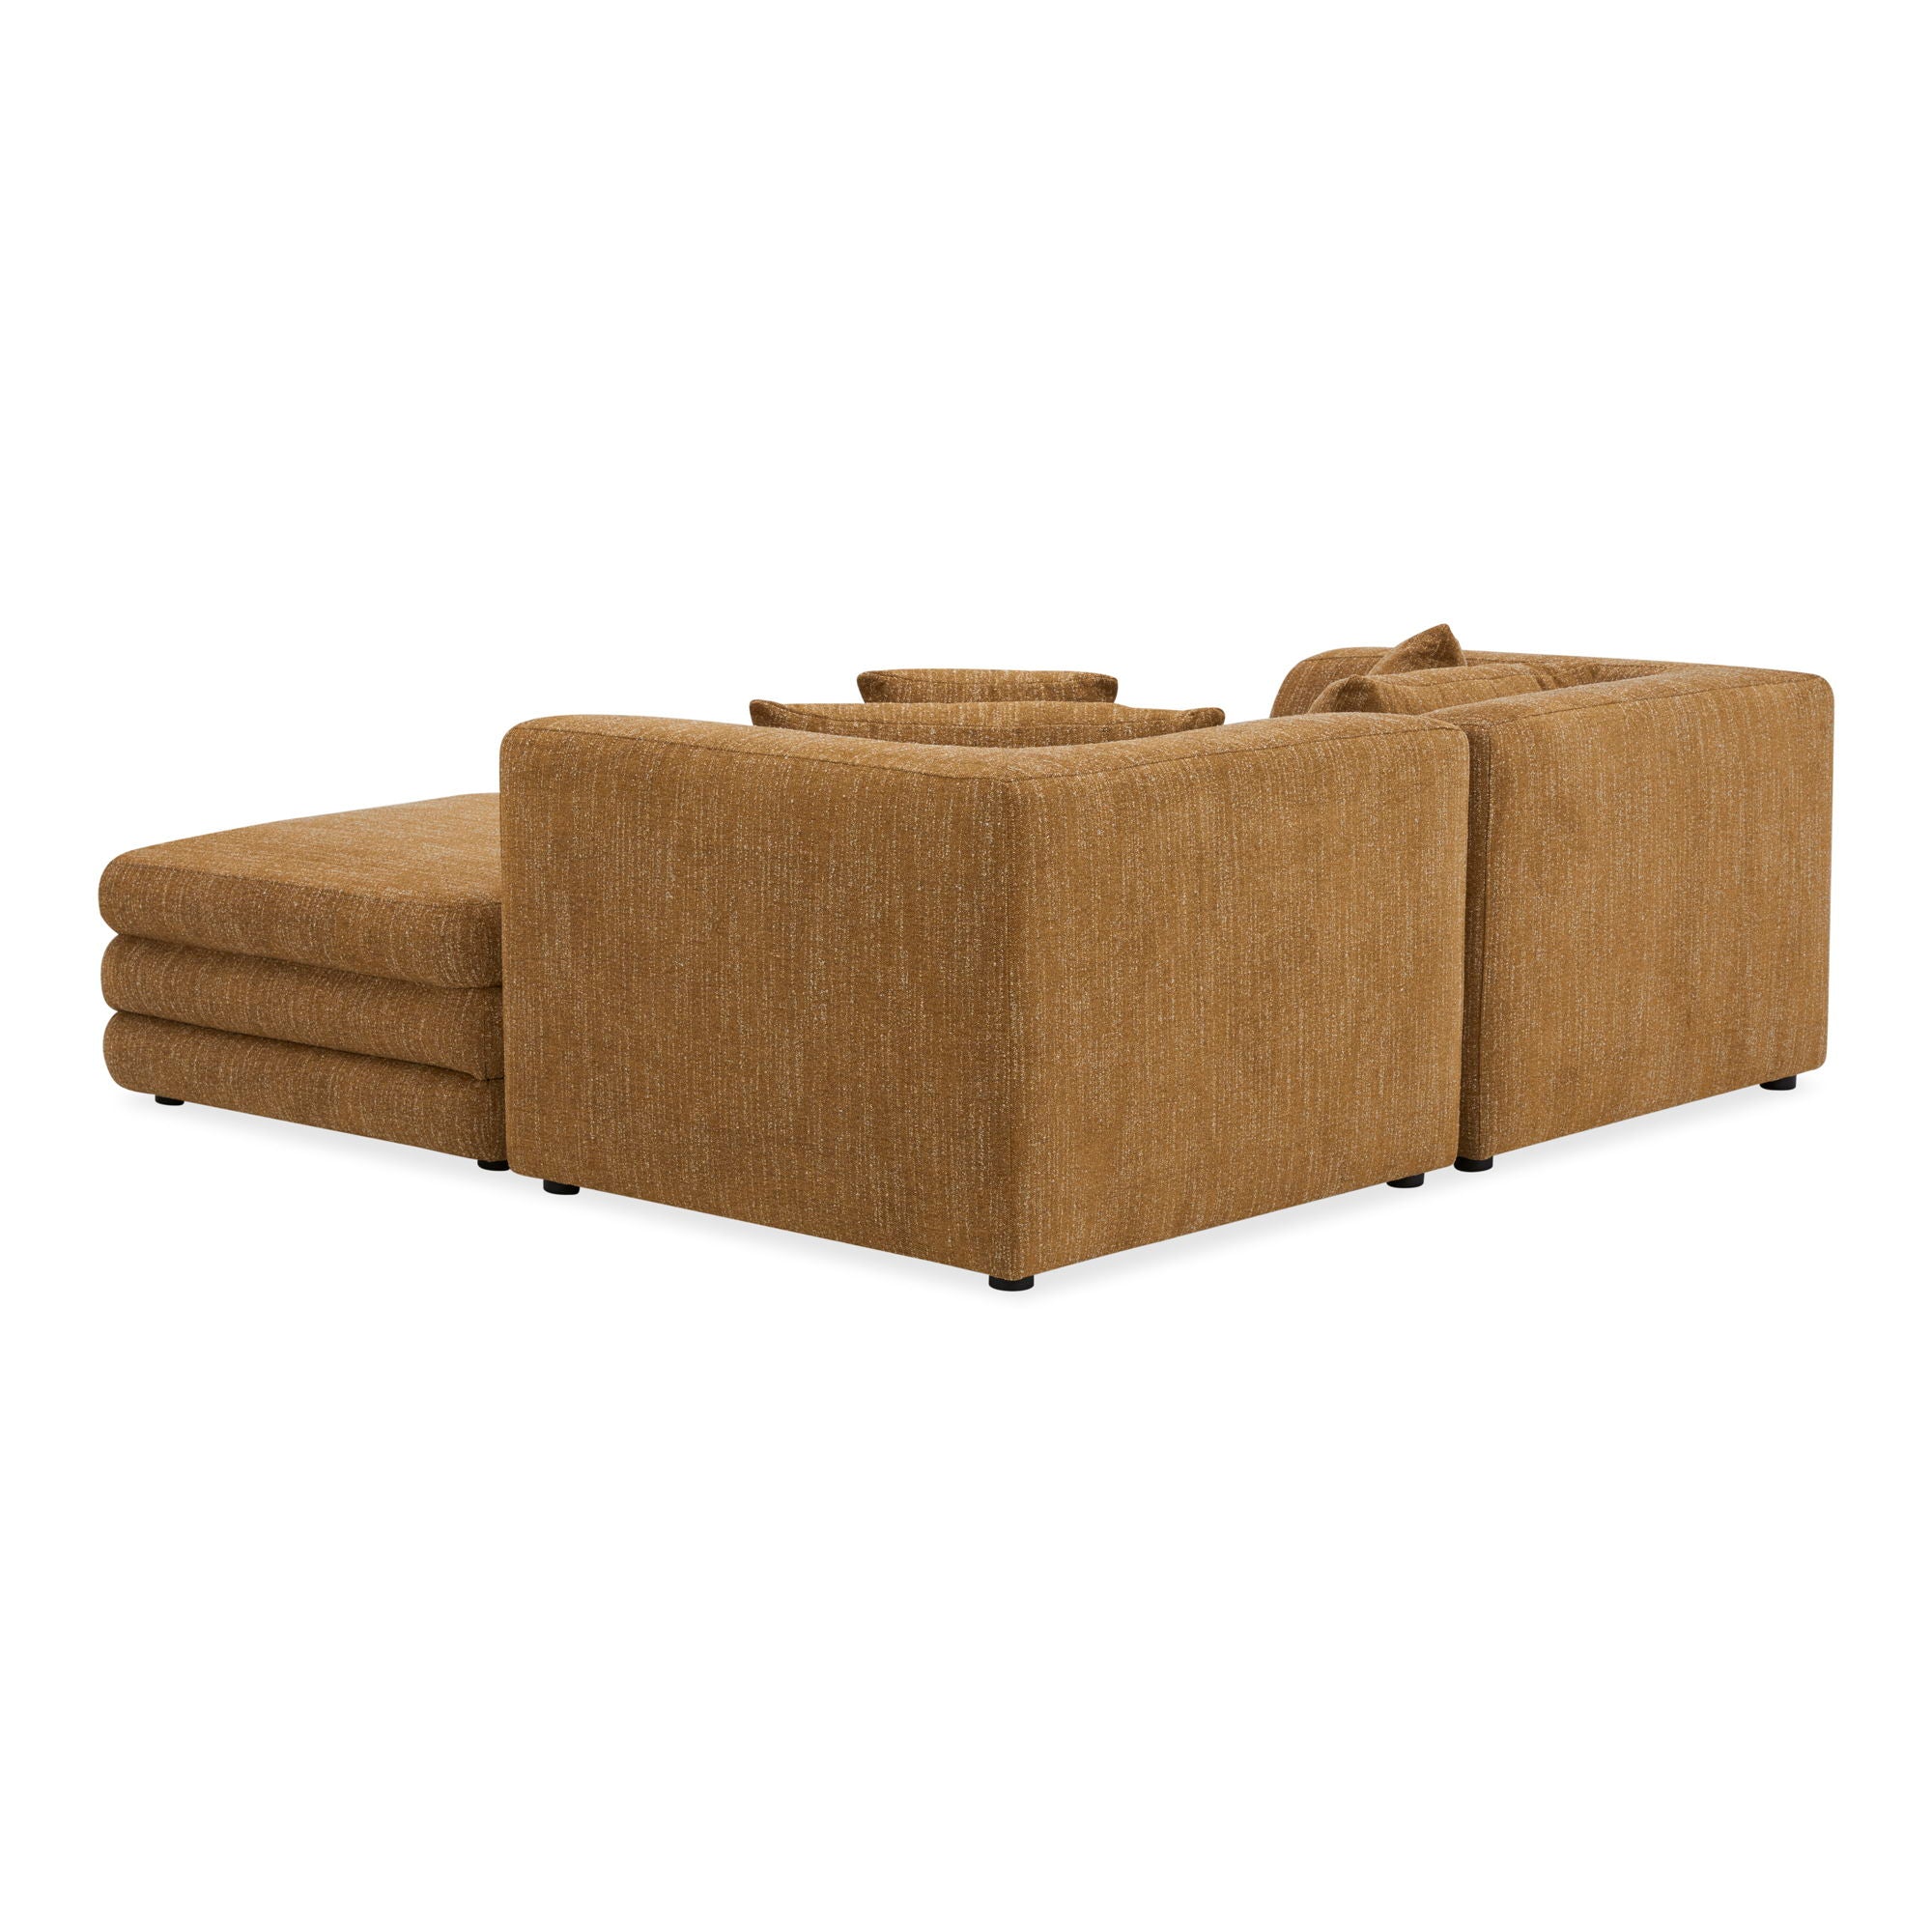 Lowtide - Nook Modular Sectional - Amber Glow-Stationary Sectionals-American Furniture Outlet